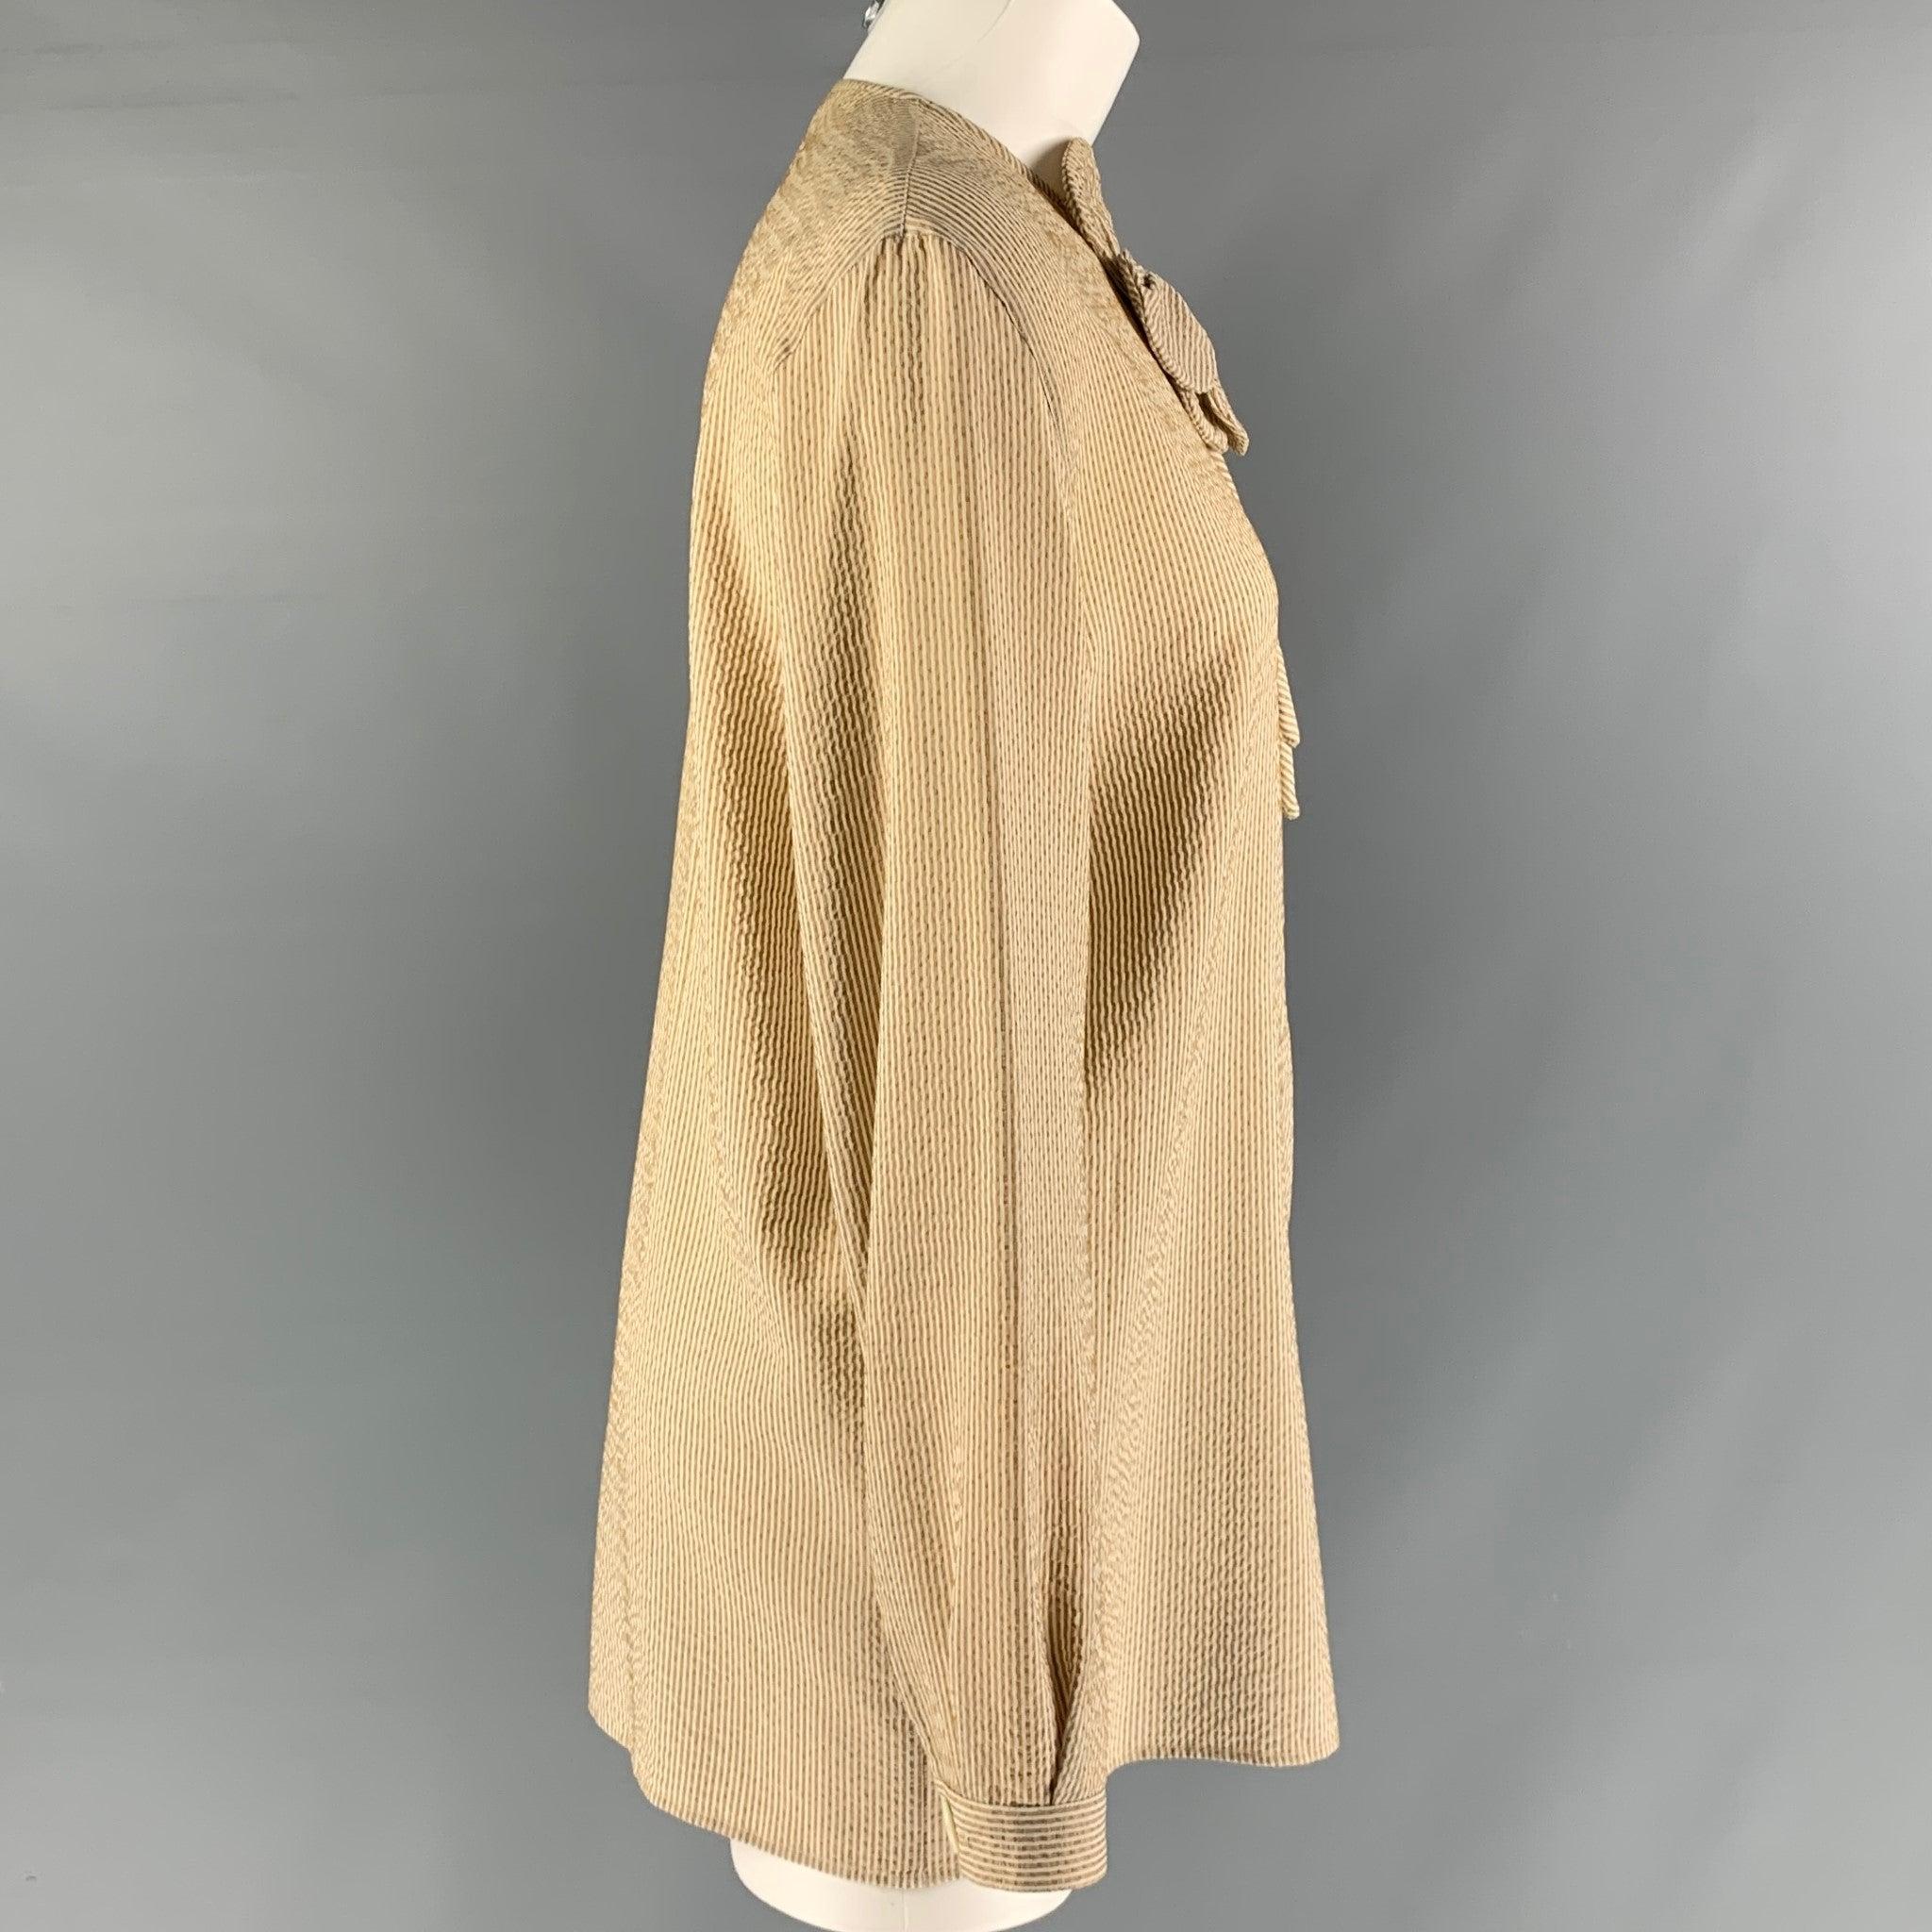 GIORGIO ARMANI vintage long sleeve blouse comes in beige striped silk features a handmade fabric flower detail at front and button down closure. Made in Italy.Excellent Pre-Owned Condition.  

Marked:   42 

Measurements: 
 
Shoulder: 16 inBust: 42